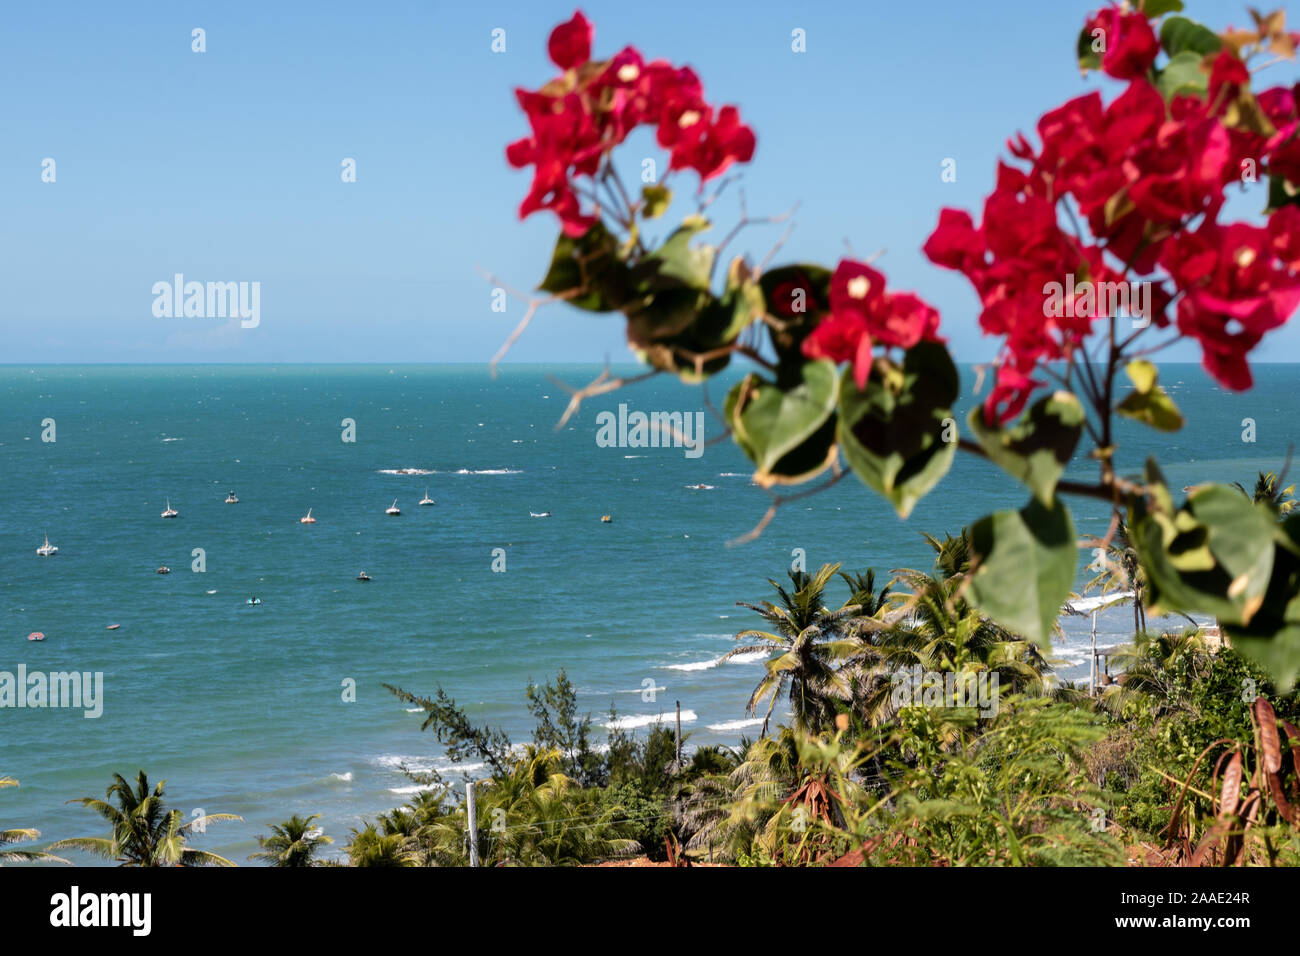 scenes from the coast of the Ceará state in northeastern Brazil Stock Photo